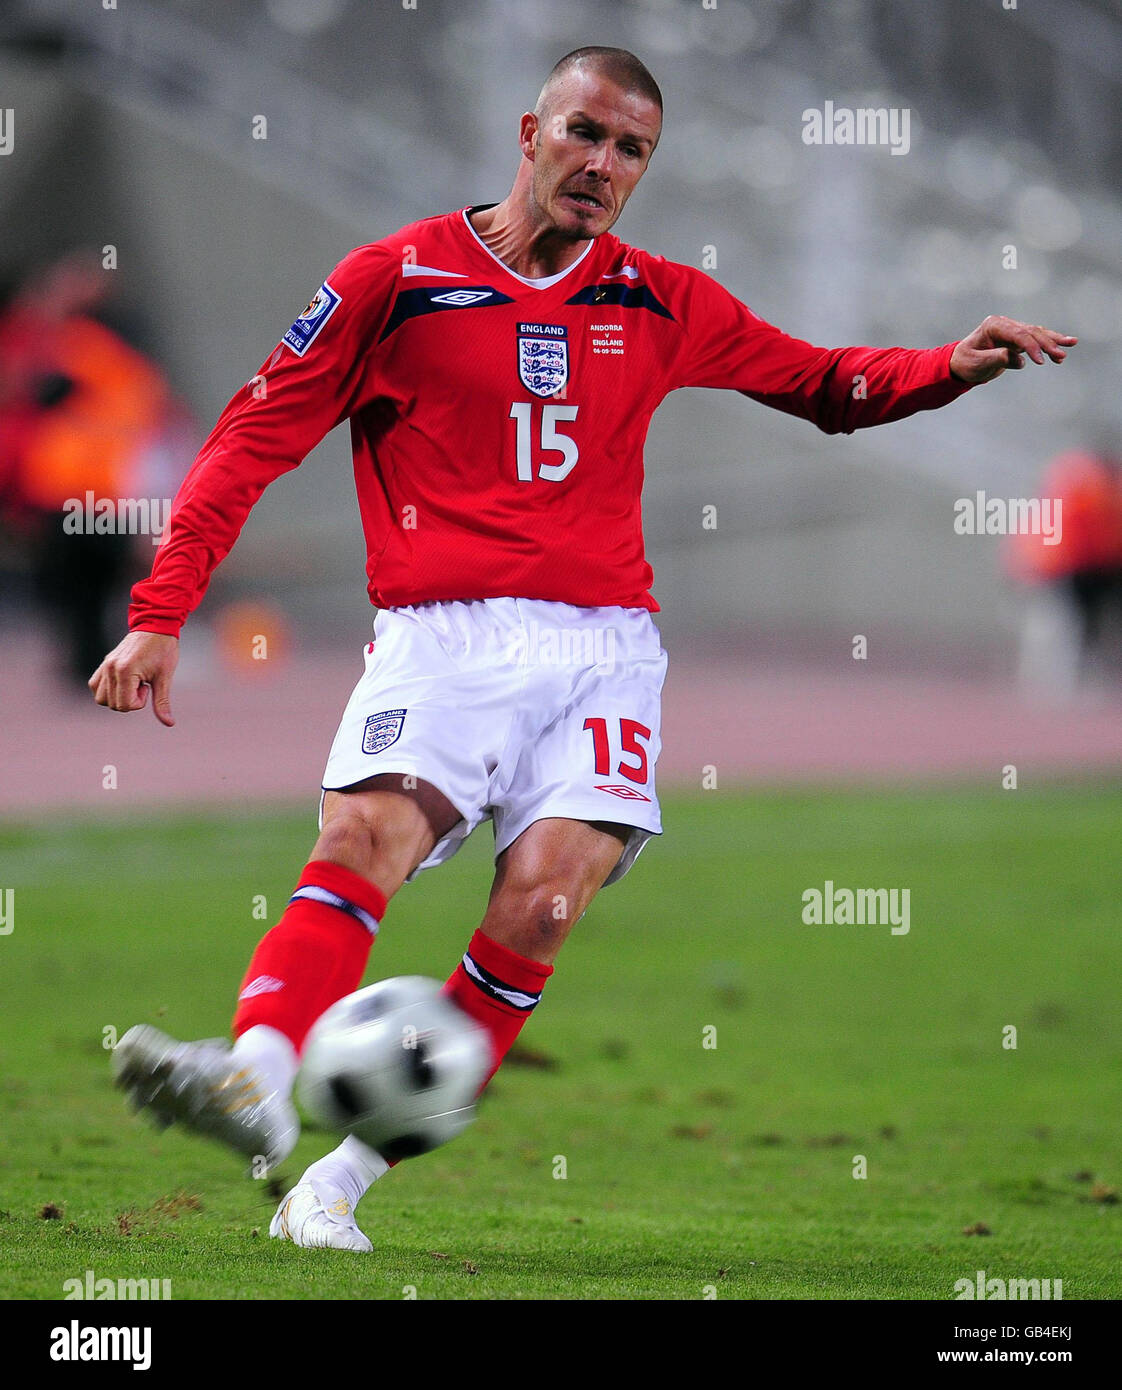 Soccer - FIFA World Cup 2010 - Qualifying Round - Group Six - Andorra v England - Olympic Stadium - Barcelona. England's David Beckham in action during the World Cup Qualifying Group Six match at the Olympic Stadium, Barcelona, Spain. Stock Photo